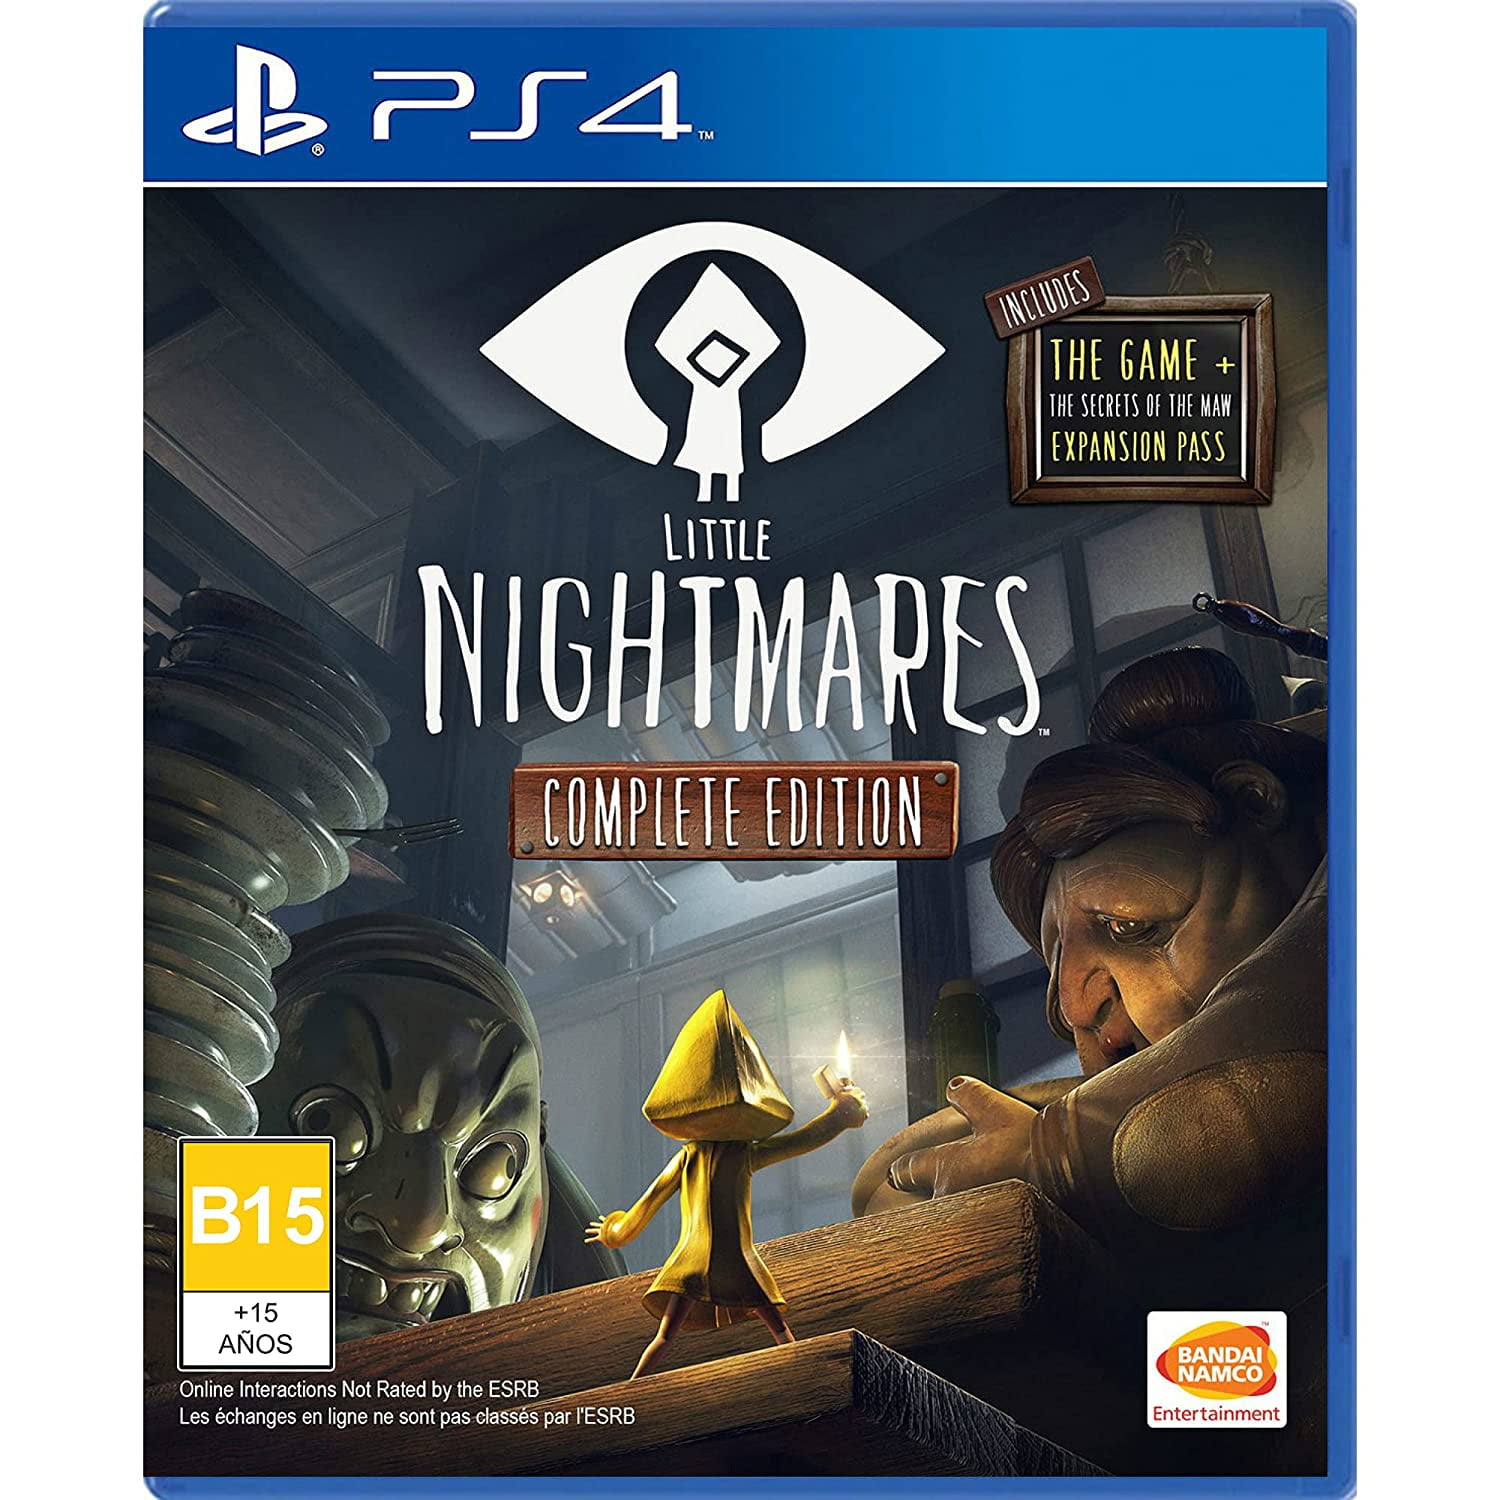 Little Nightmares 2, PS4 - PS4 Pro - One - One X